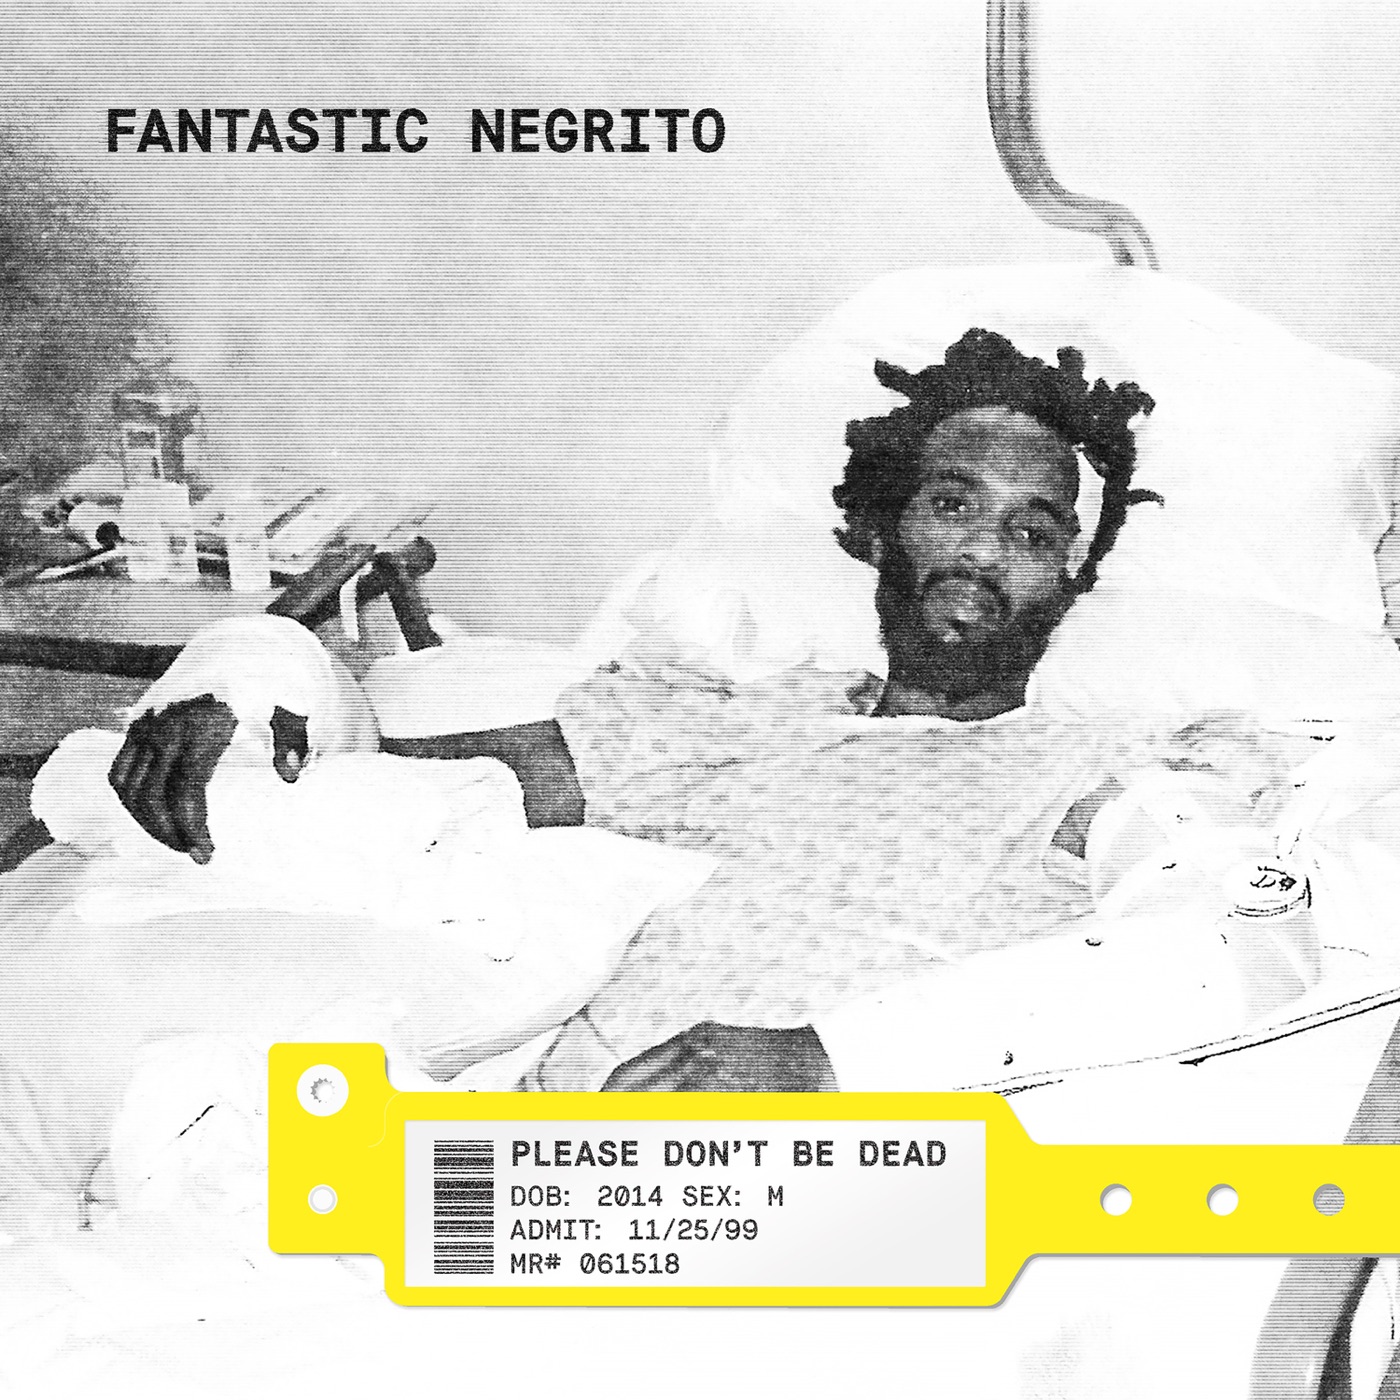 Please Don't Be Dead by Fantastic Negrito